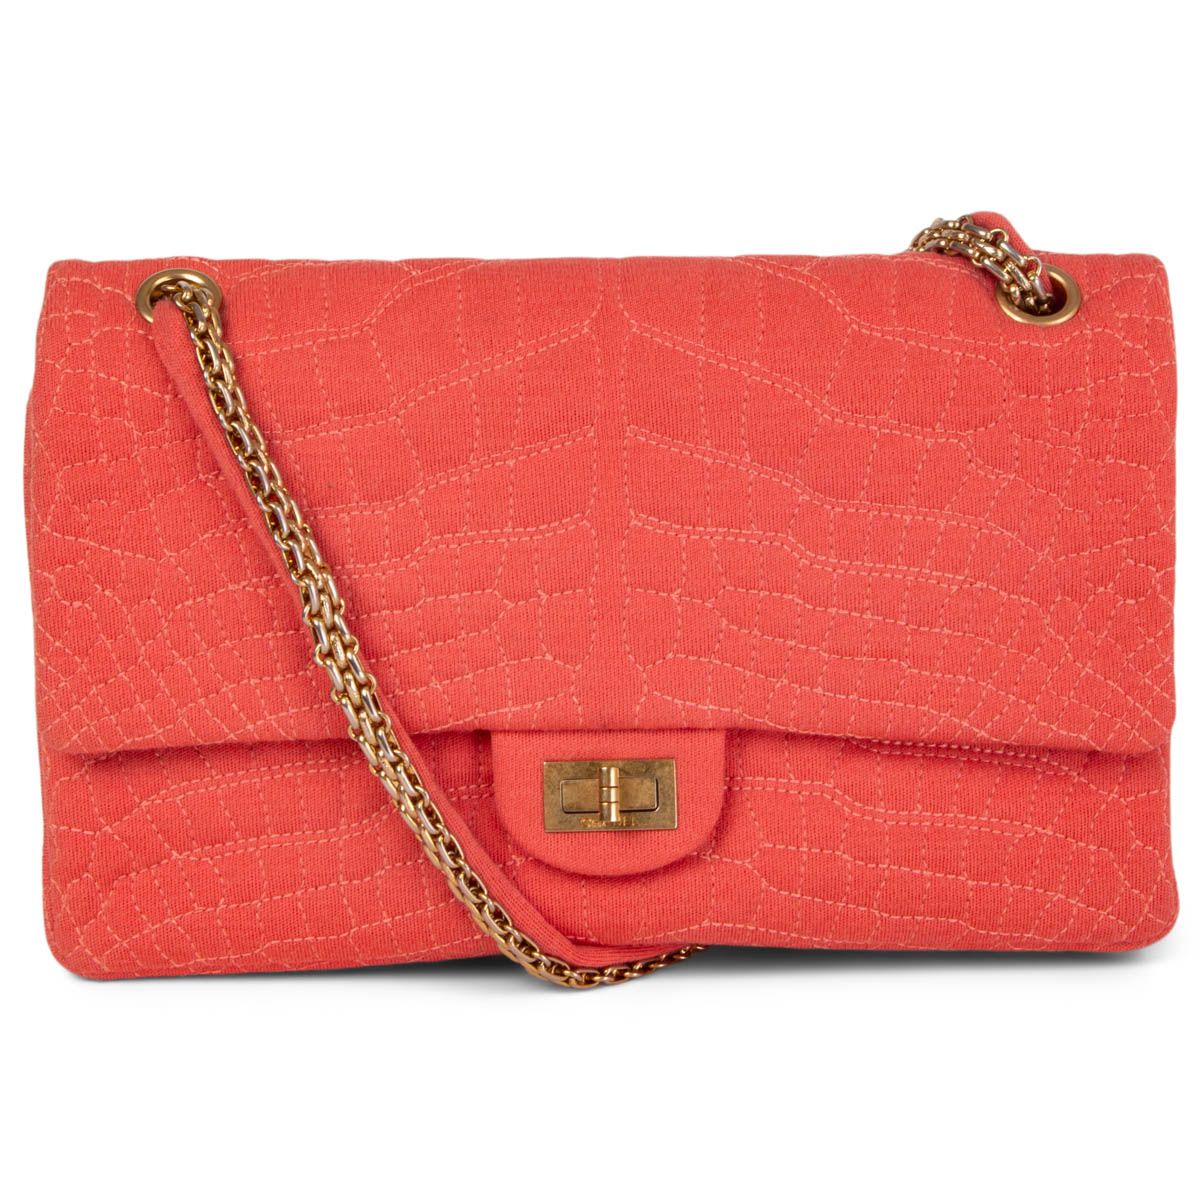 Chanel Jersey Coco's Croc 2.55 Reissue 226 Double Flap Bag Coral